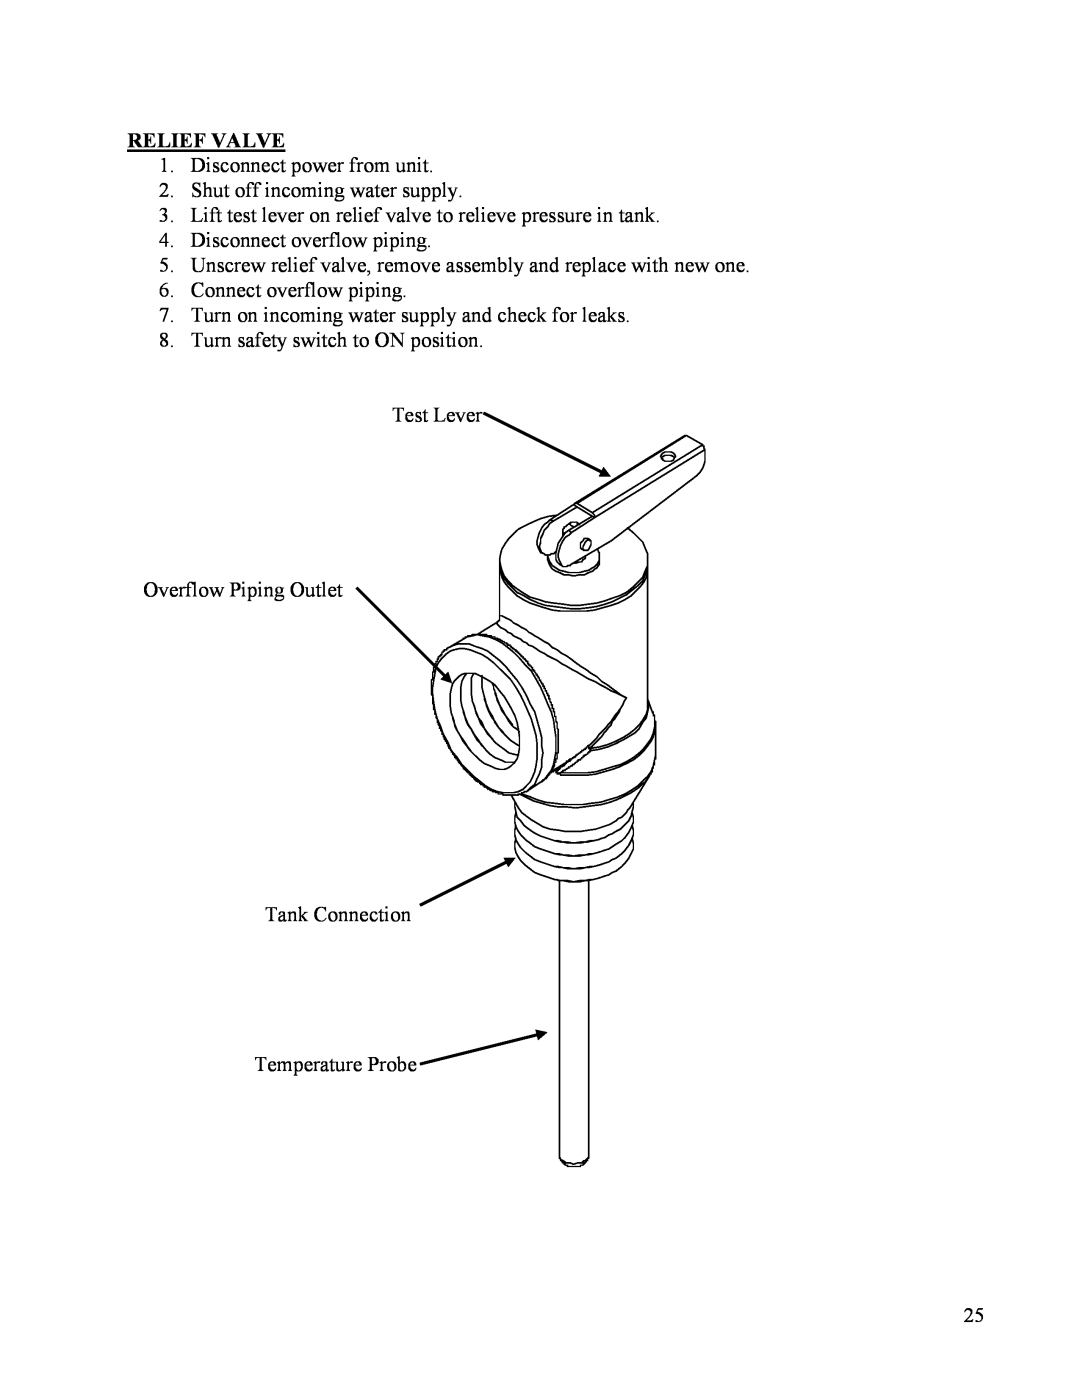 Hubbell Electric Heater Company MSE manual Relief Valve 